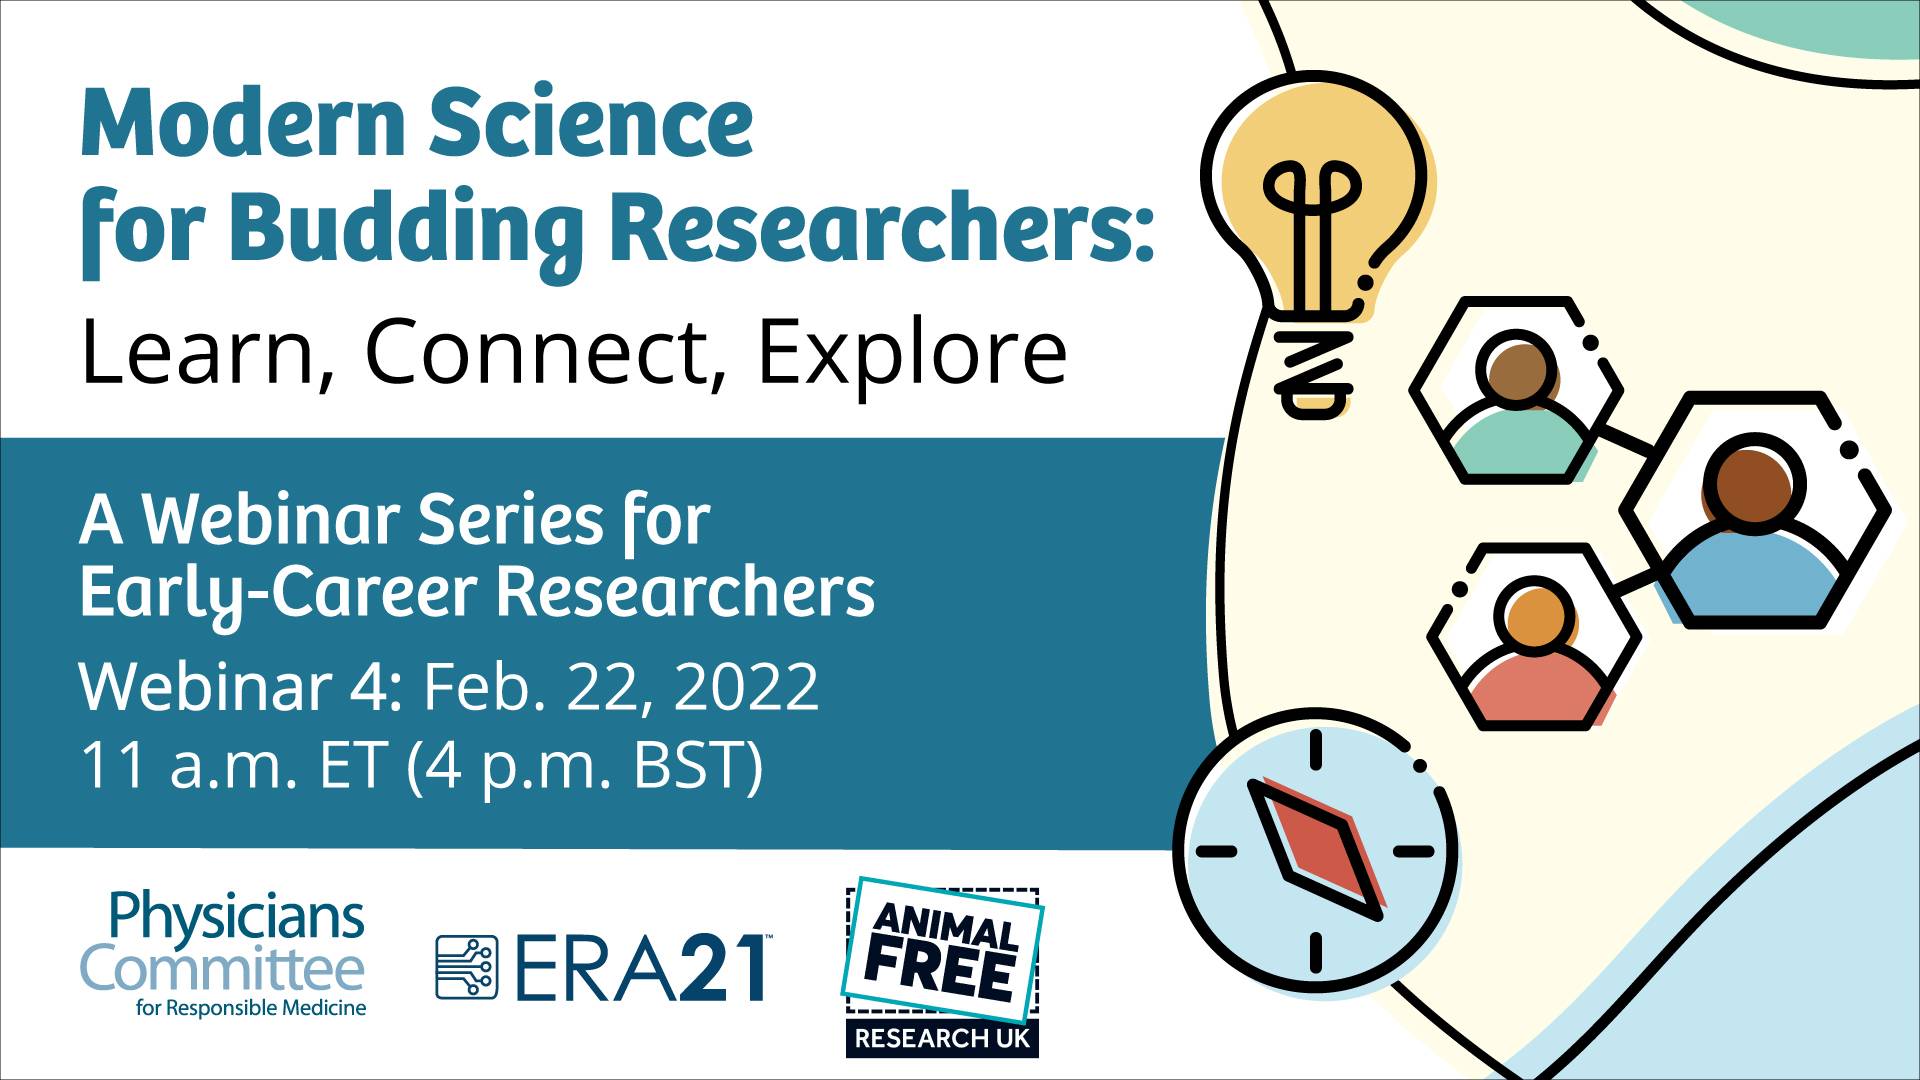 Modern Science for Budding Researchers: Learn, Connect, Explore: A Webinar Series